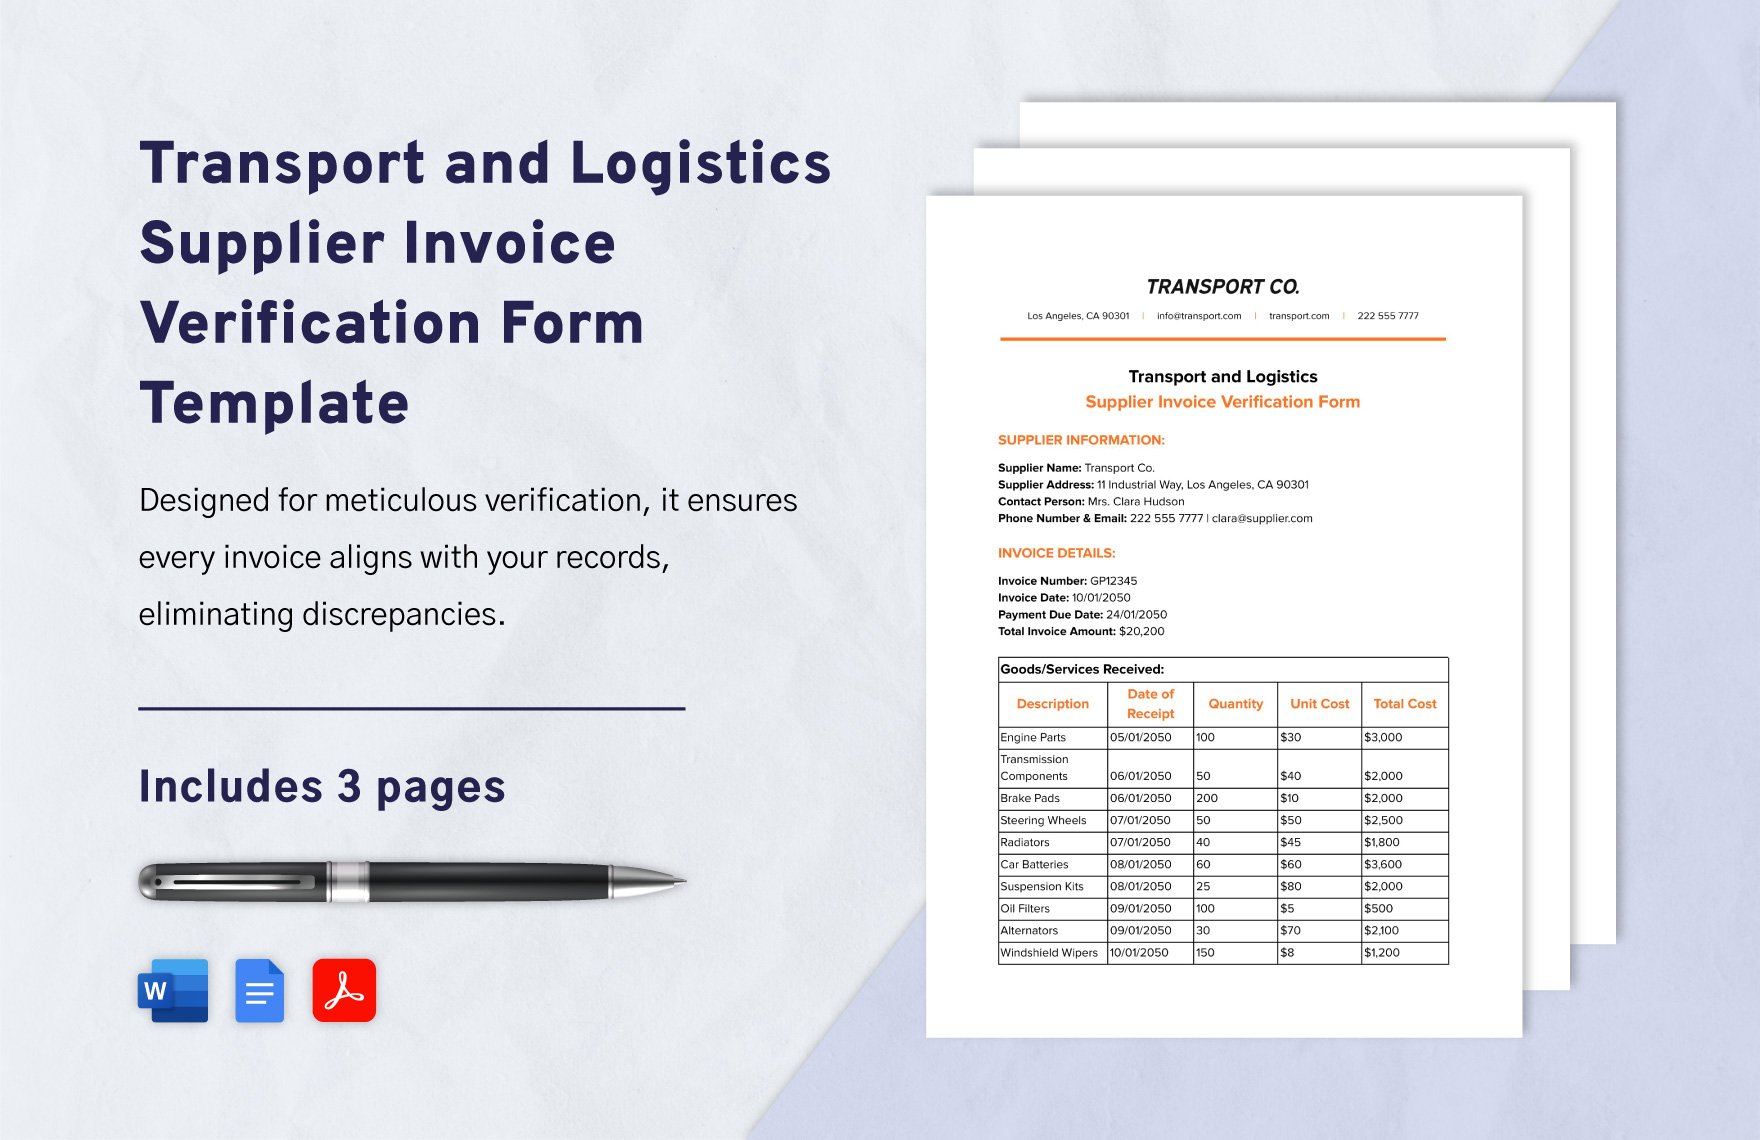 Transport and Logistics Supplier Invoice Verification Form Template in Word, Google Docs, PDF